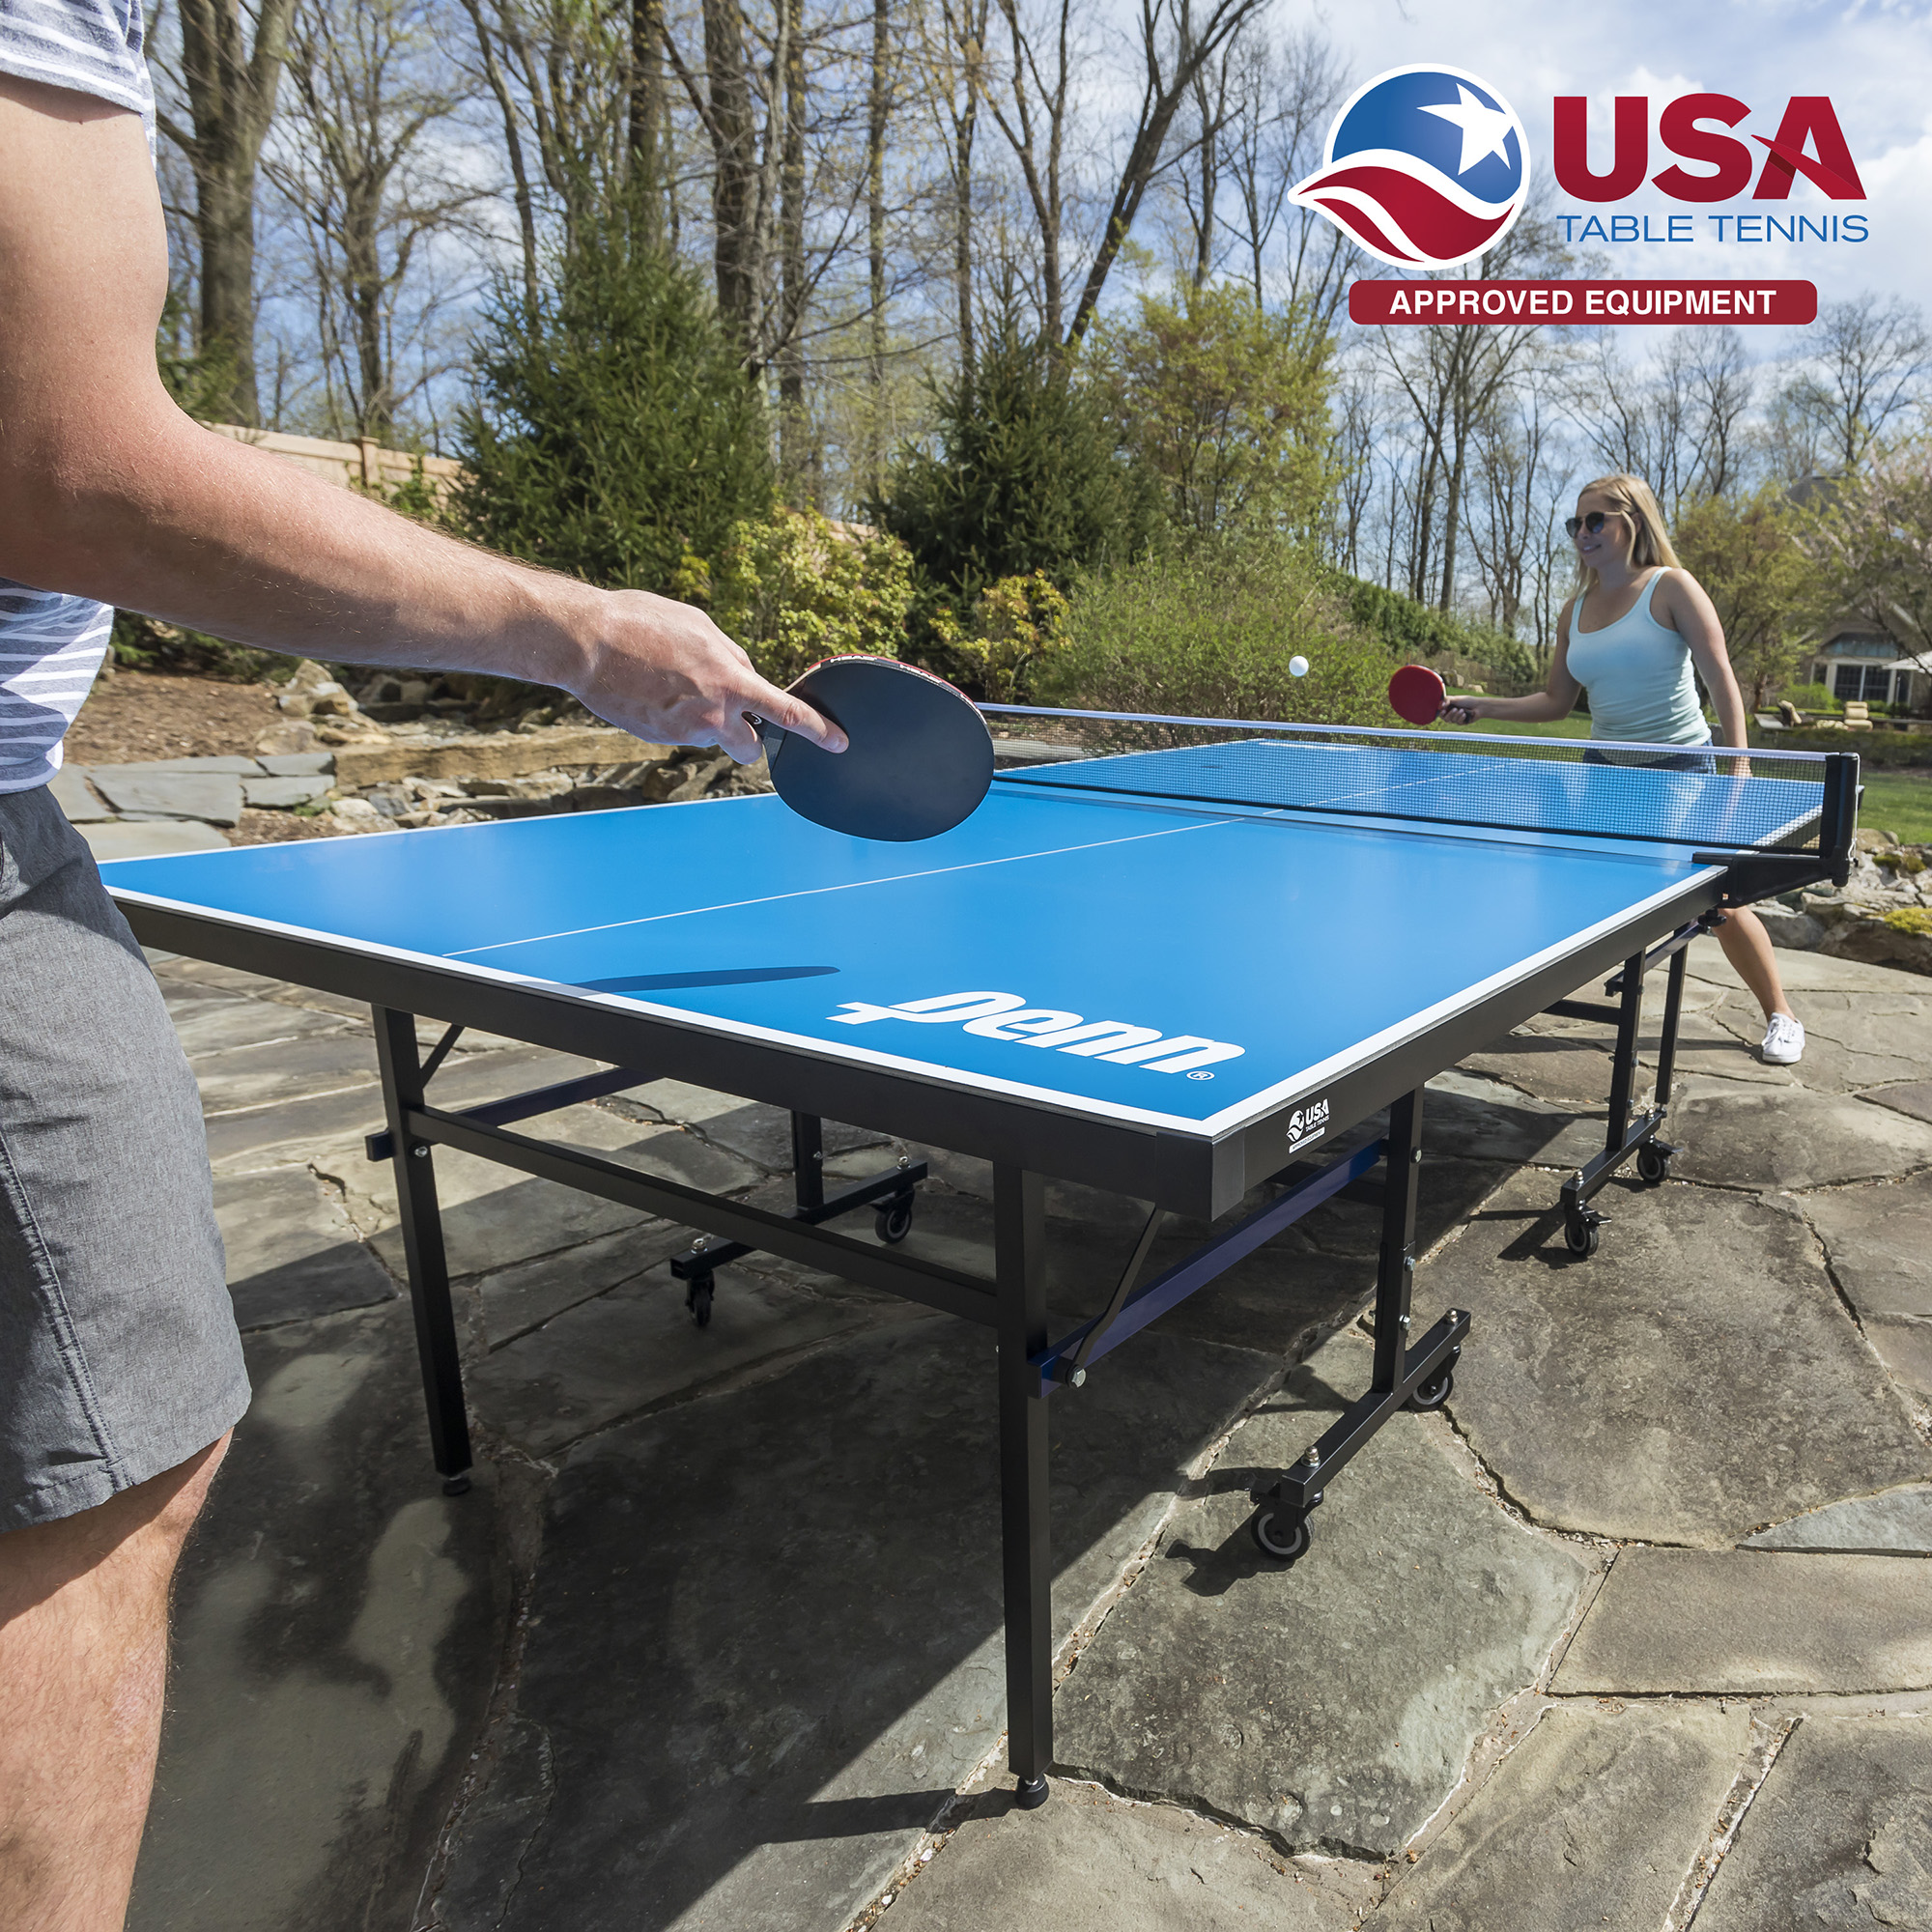 Penn Acadia Outdoor Table Tennis Table with Cover; 10 Minute Setup - image 5 of 11